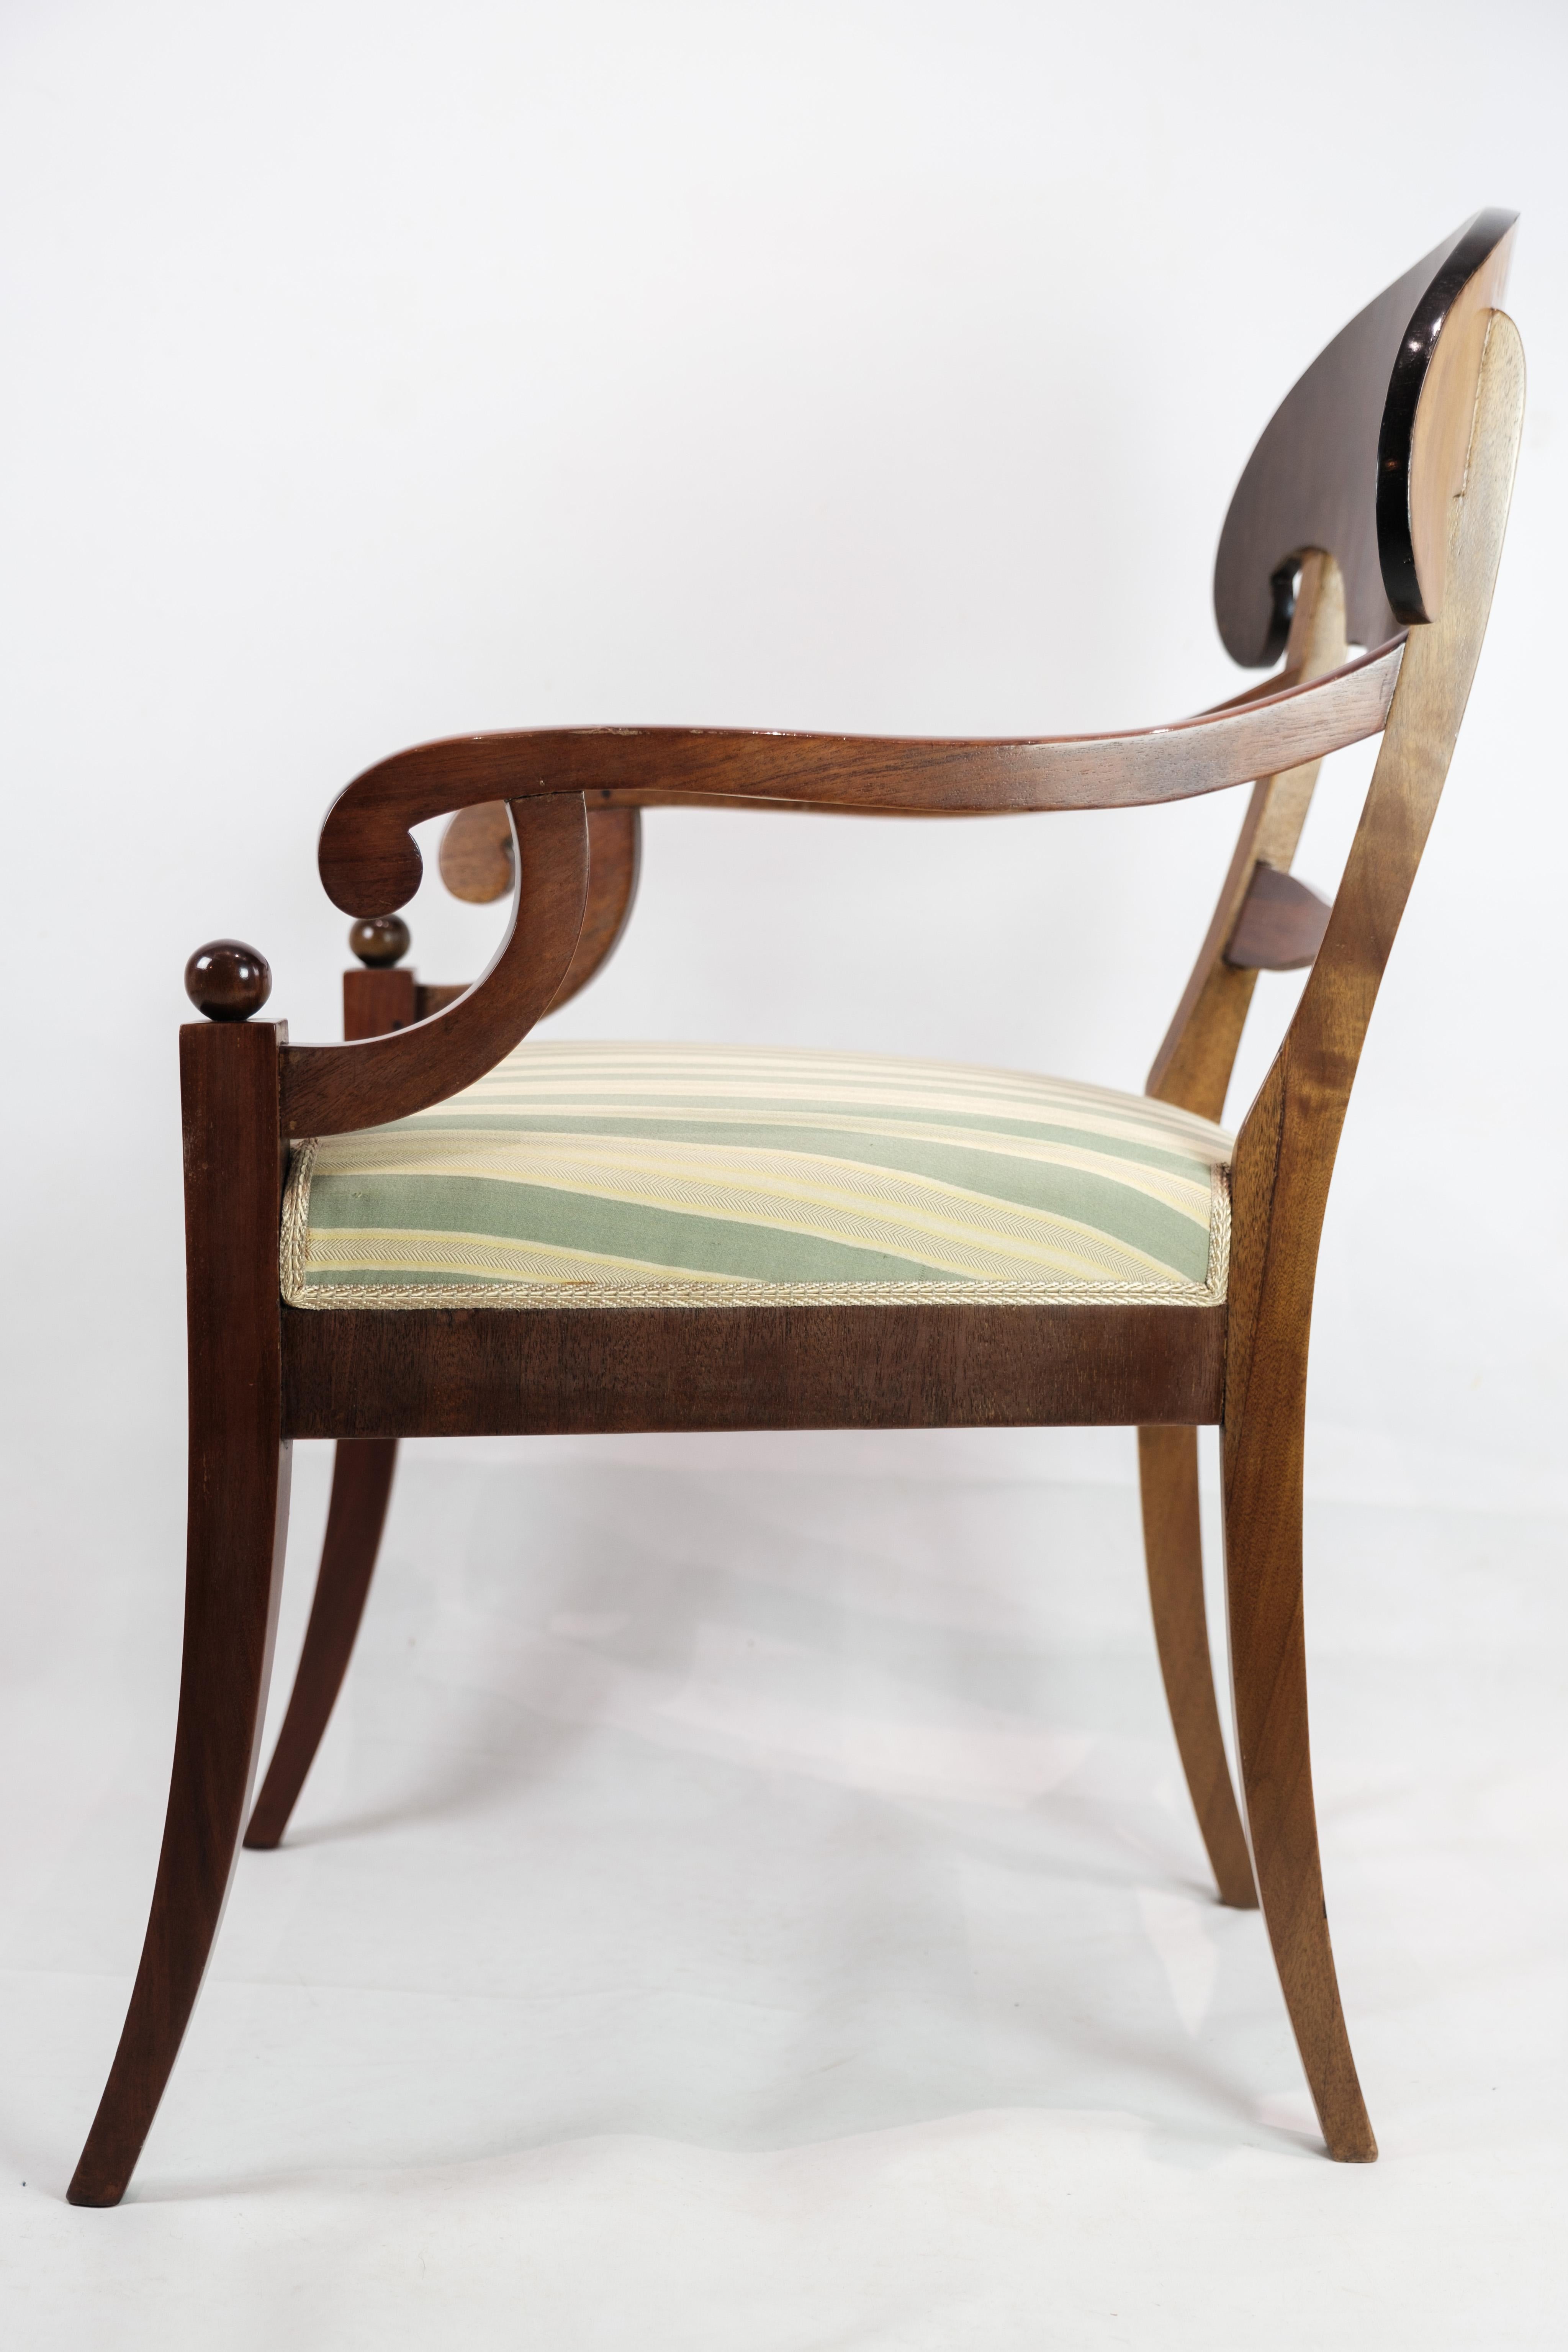 Late Empire Armchair Made In Mahogany With Light Striped Fabric From 1840s For Sale 1